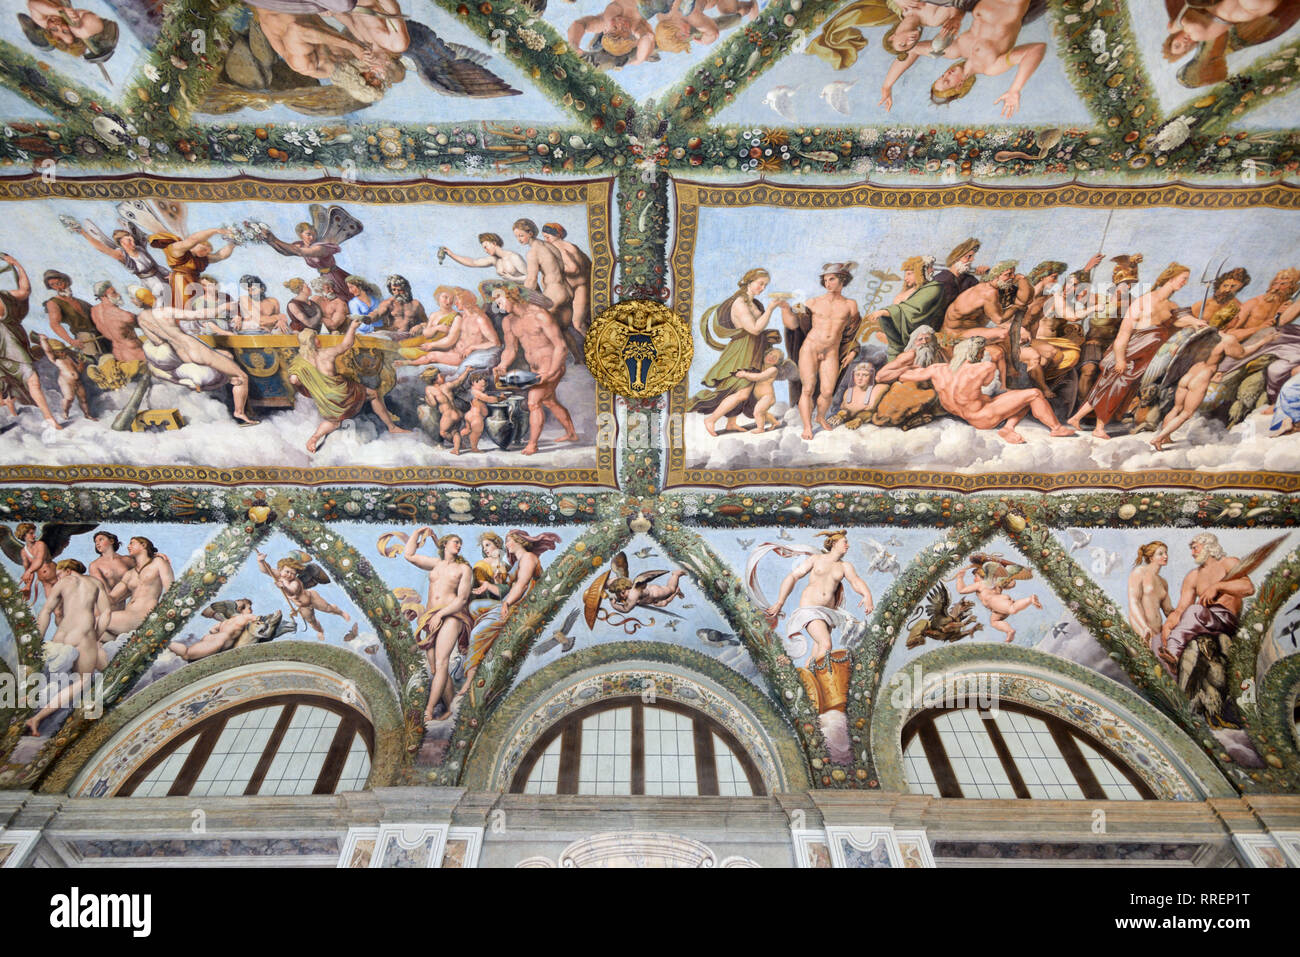 Painted Ceiling of the Loggia of Cupid & Psyche (1518) by Raphaël, in the Renaissance Villa Farnesina, built 1506-1510, Trastevere Rome Italy Stock Photo